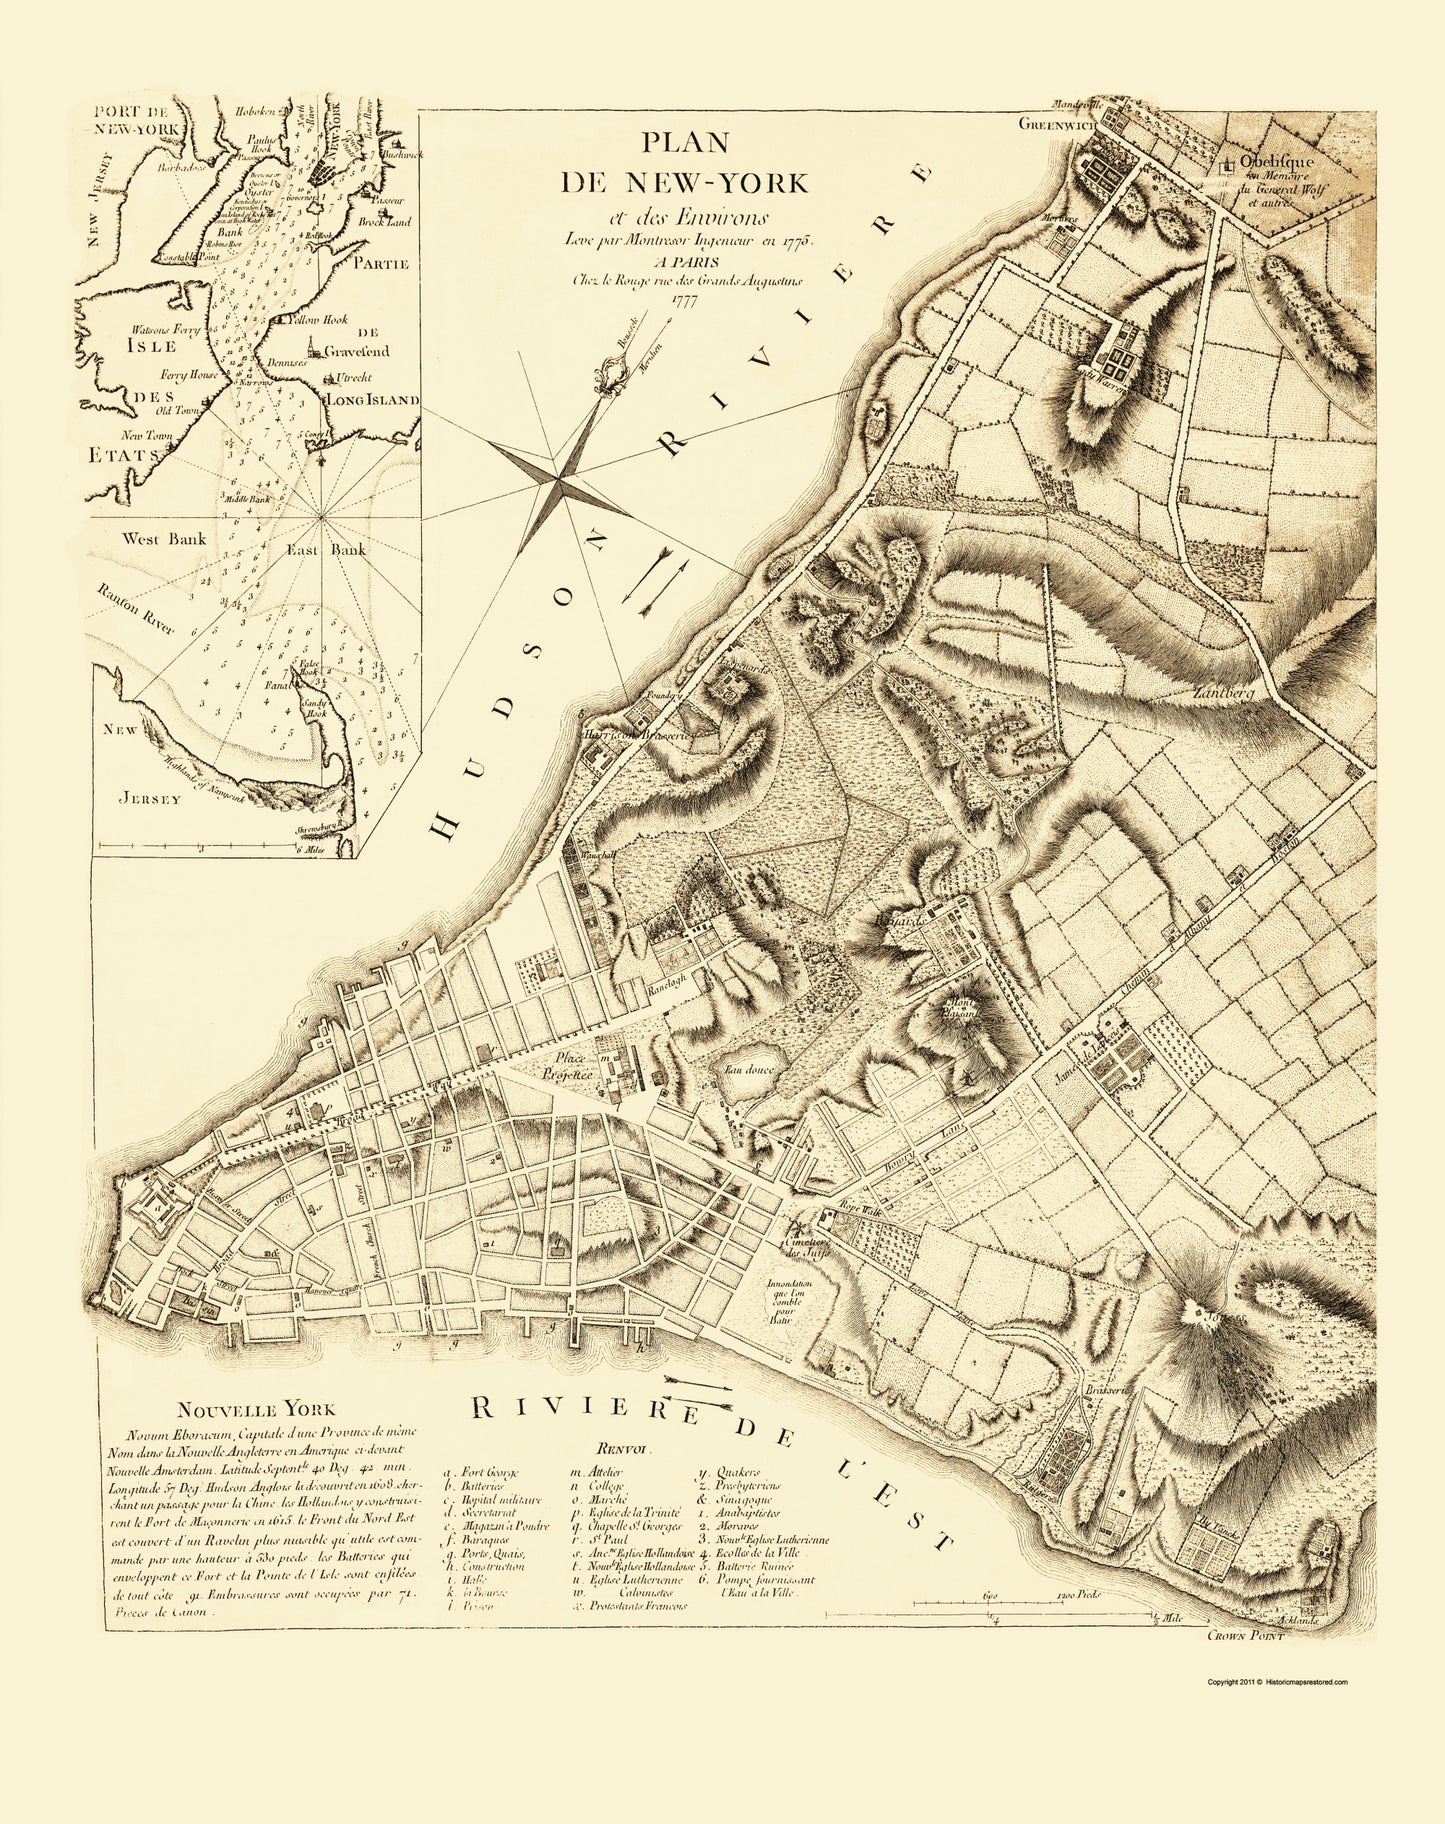 Historic City Map - New York New York Planning - French Engineers 1775 - 23 x 29.04 - Vintage Wall Art